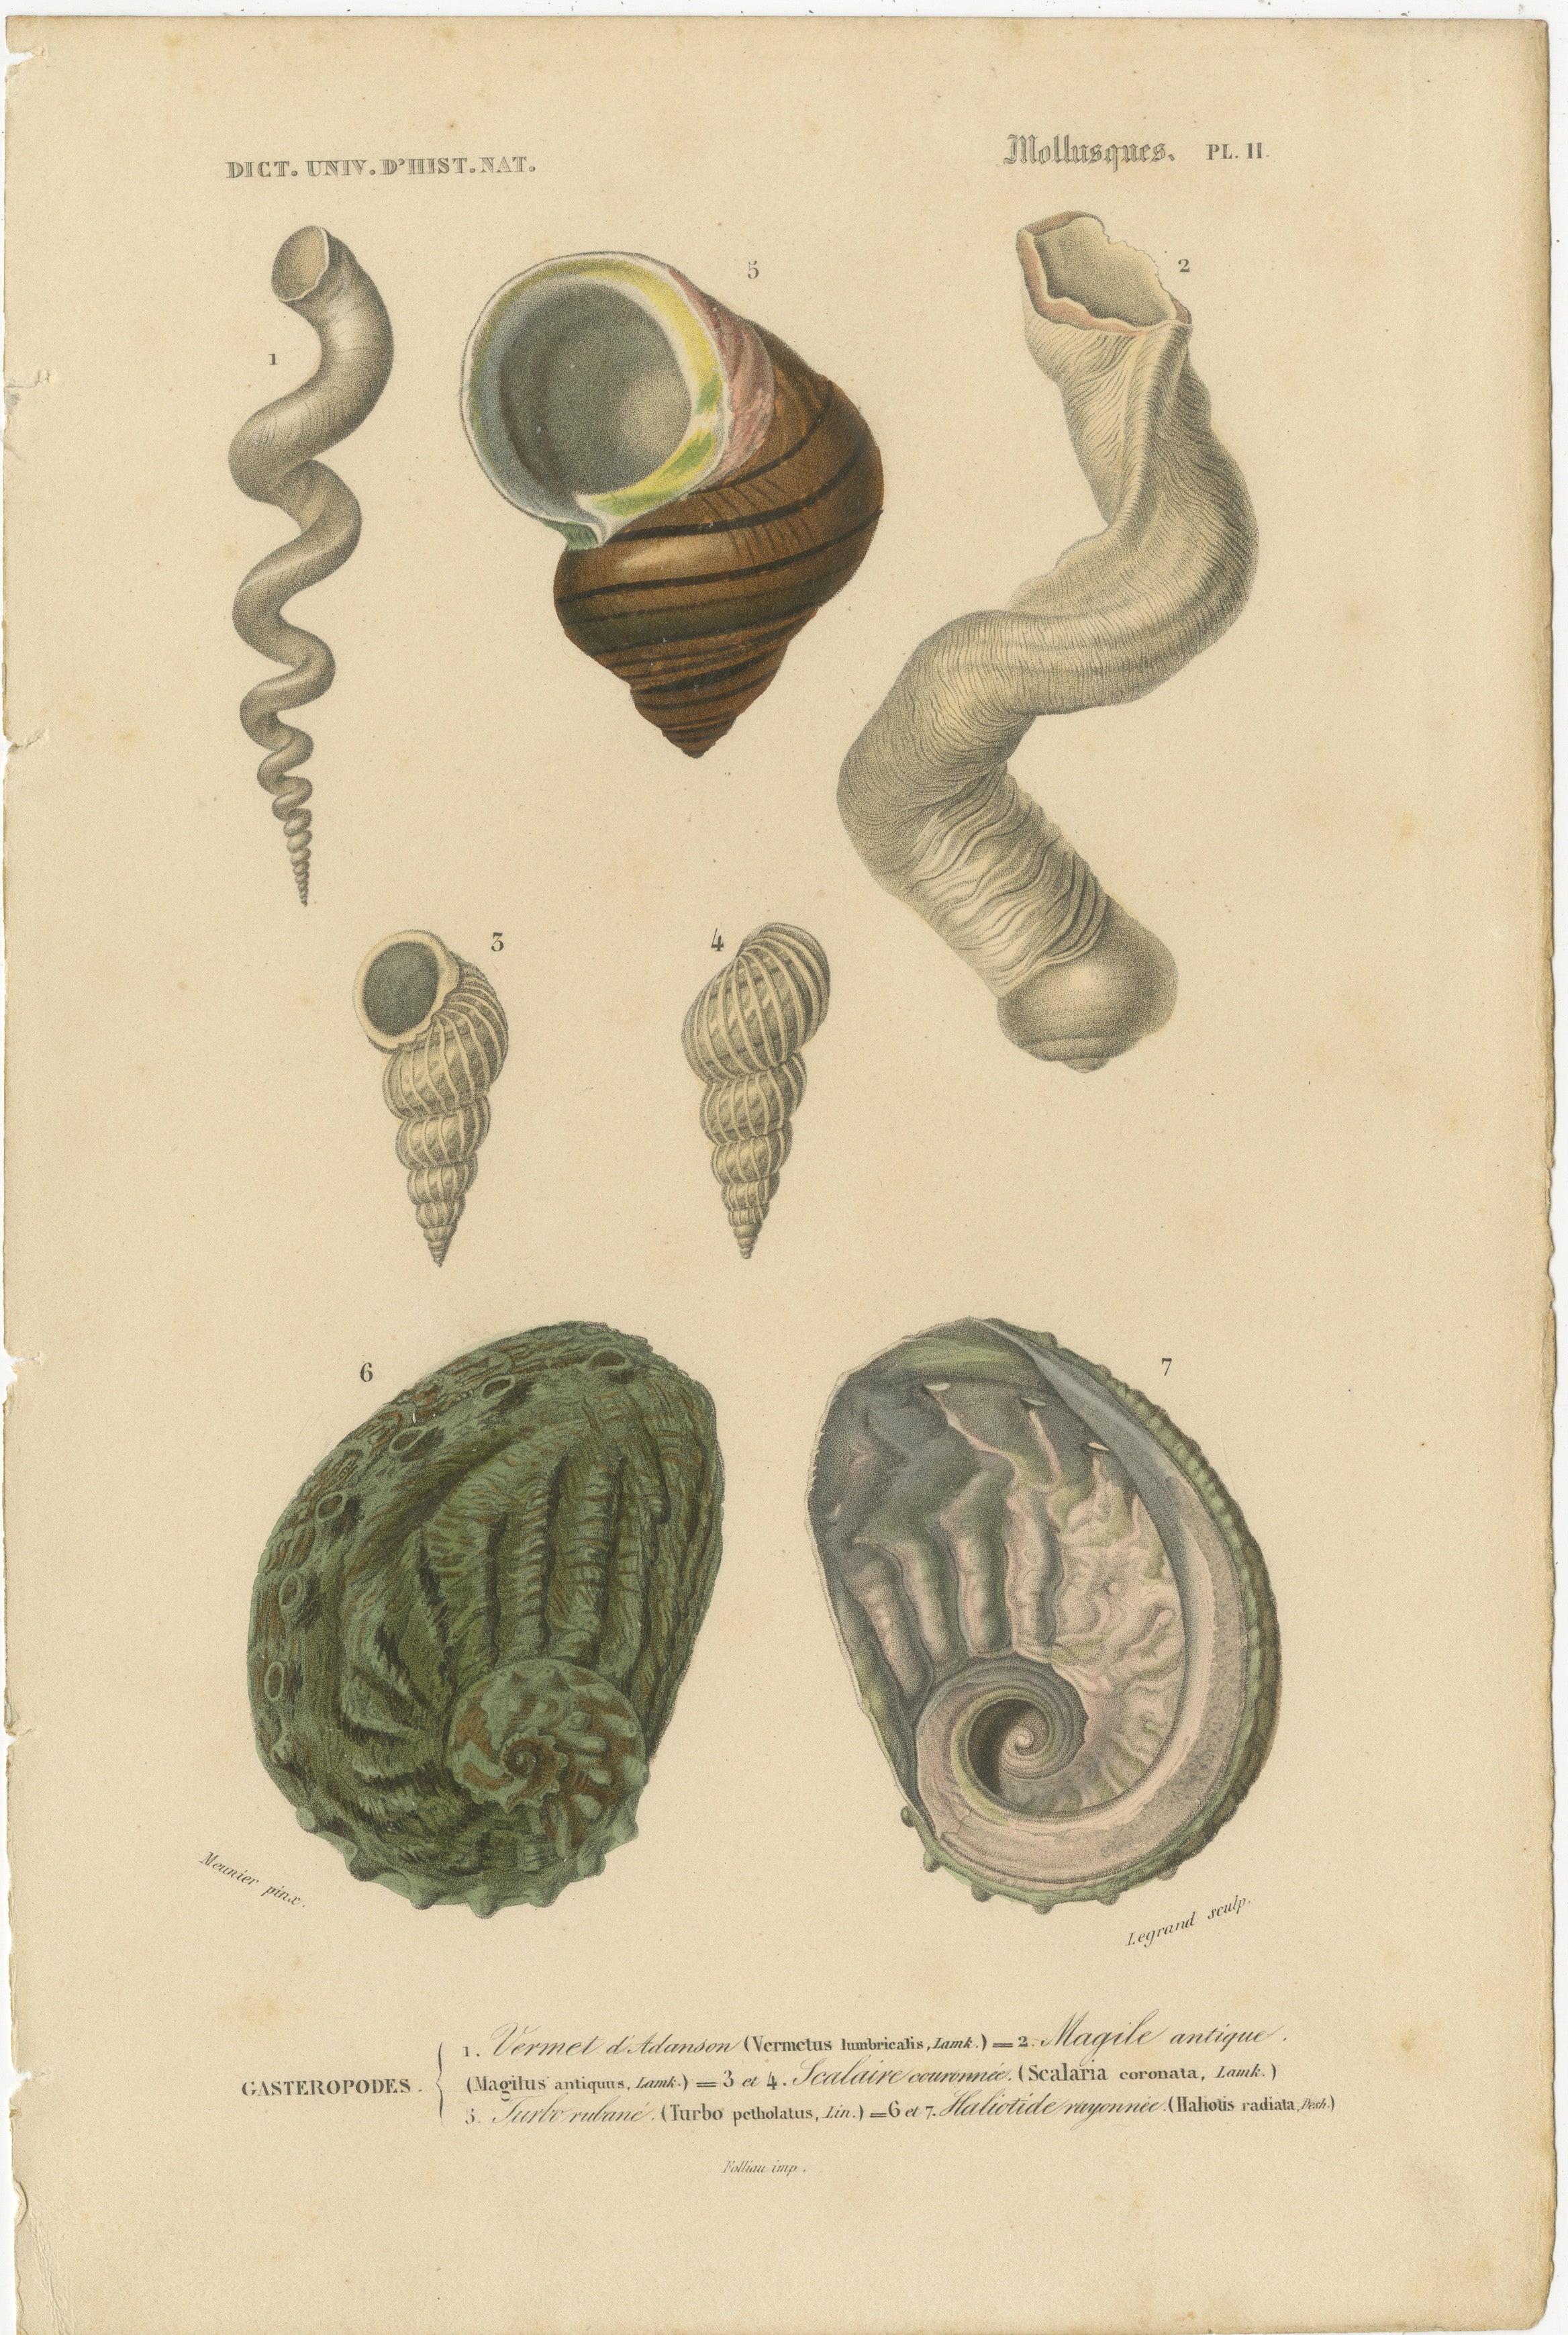 This collage presents a curated anthology of mollusk illustrations, emphasizing the elegance of their spiral forms—a hallmark of marine gastropods. Each image, a hand-colored engraving from the 